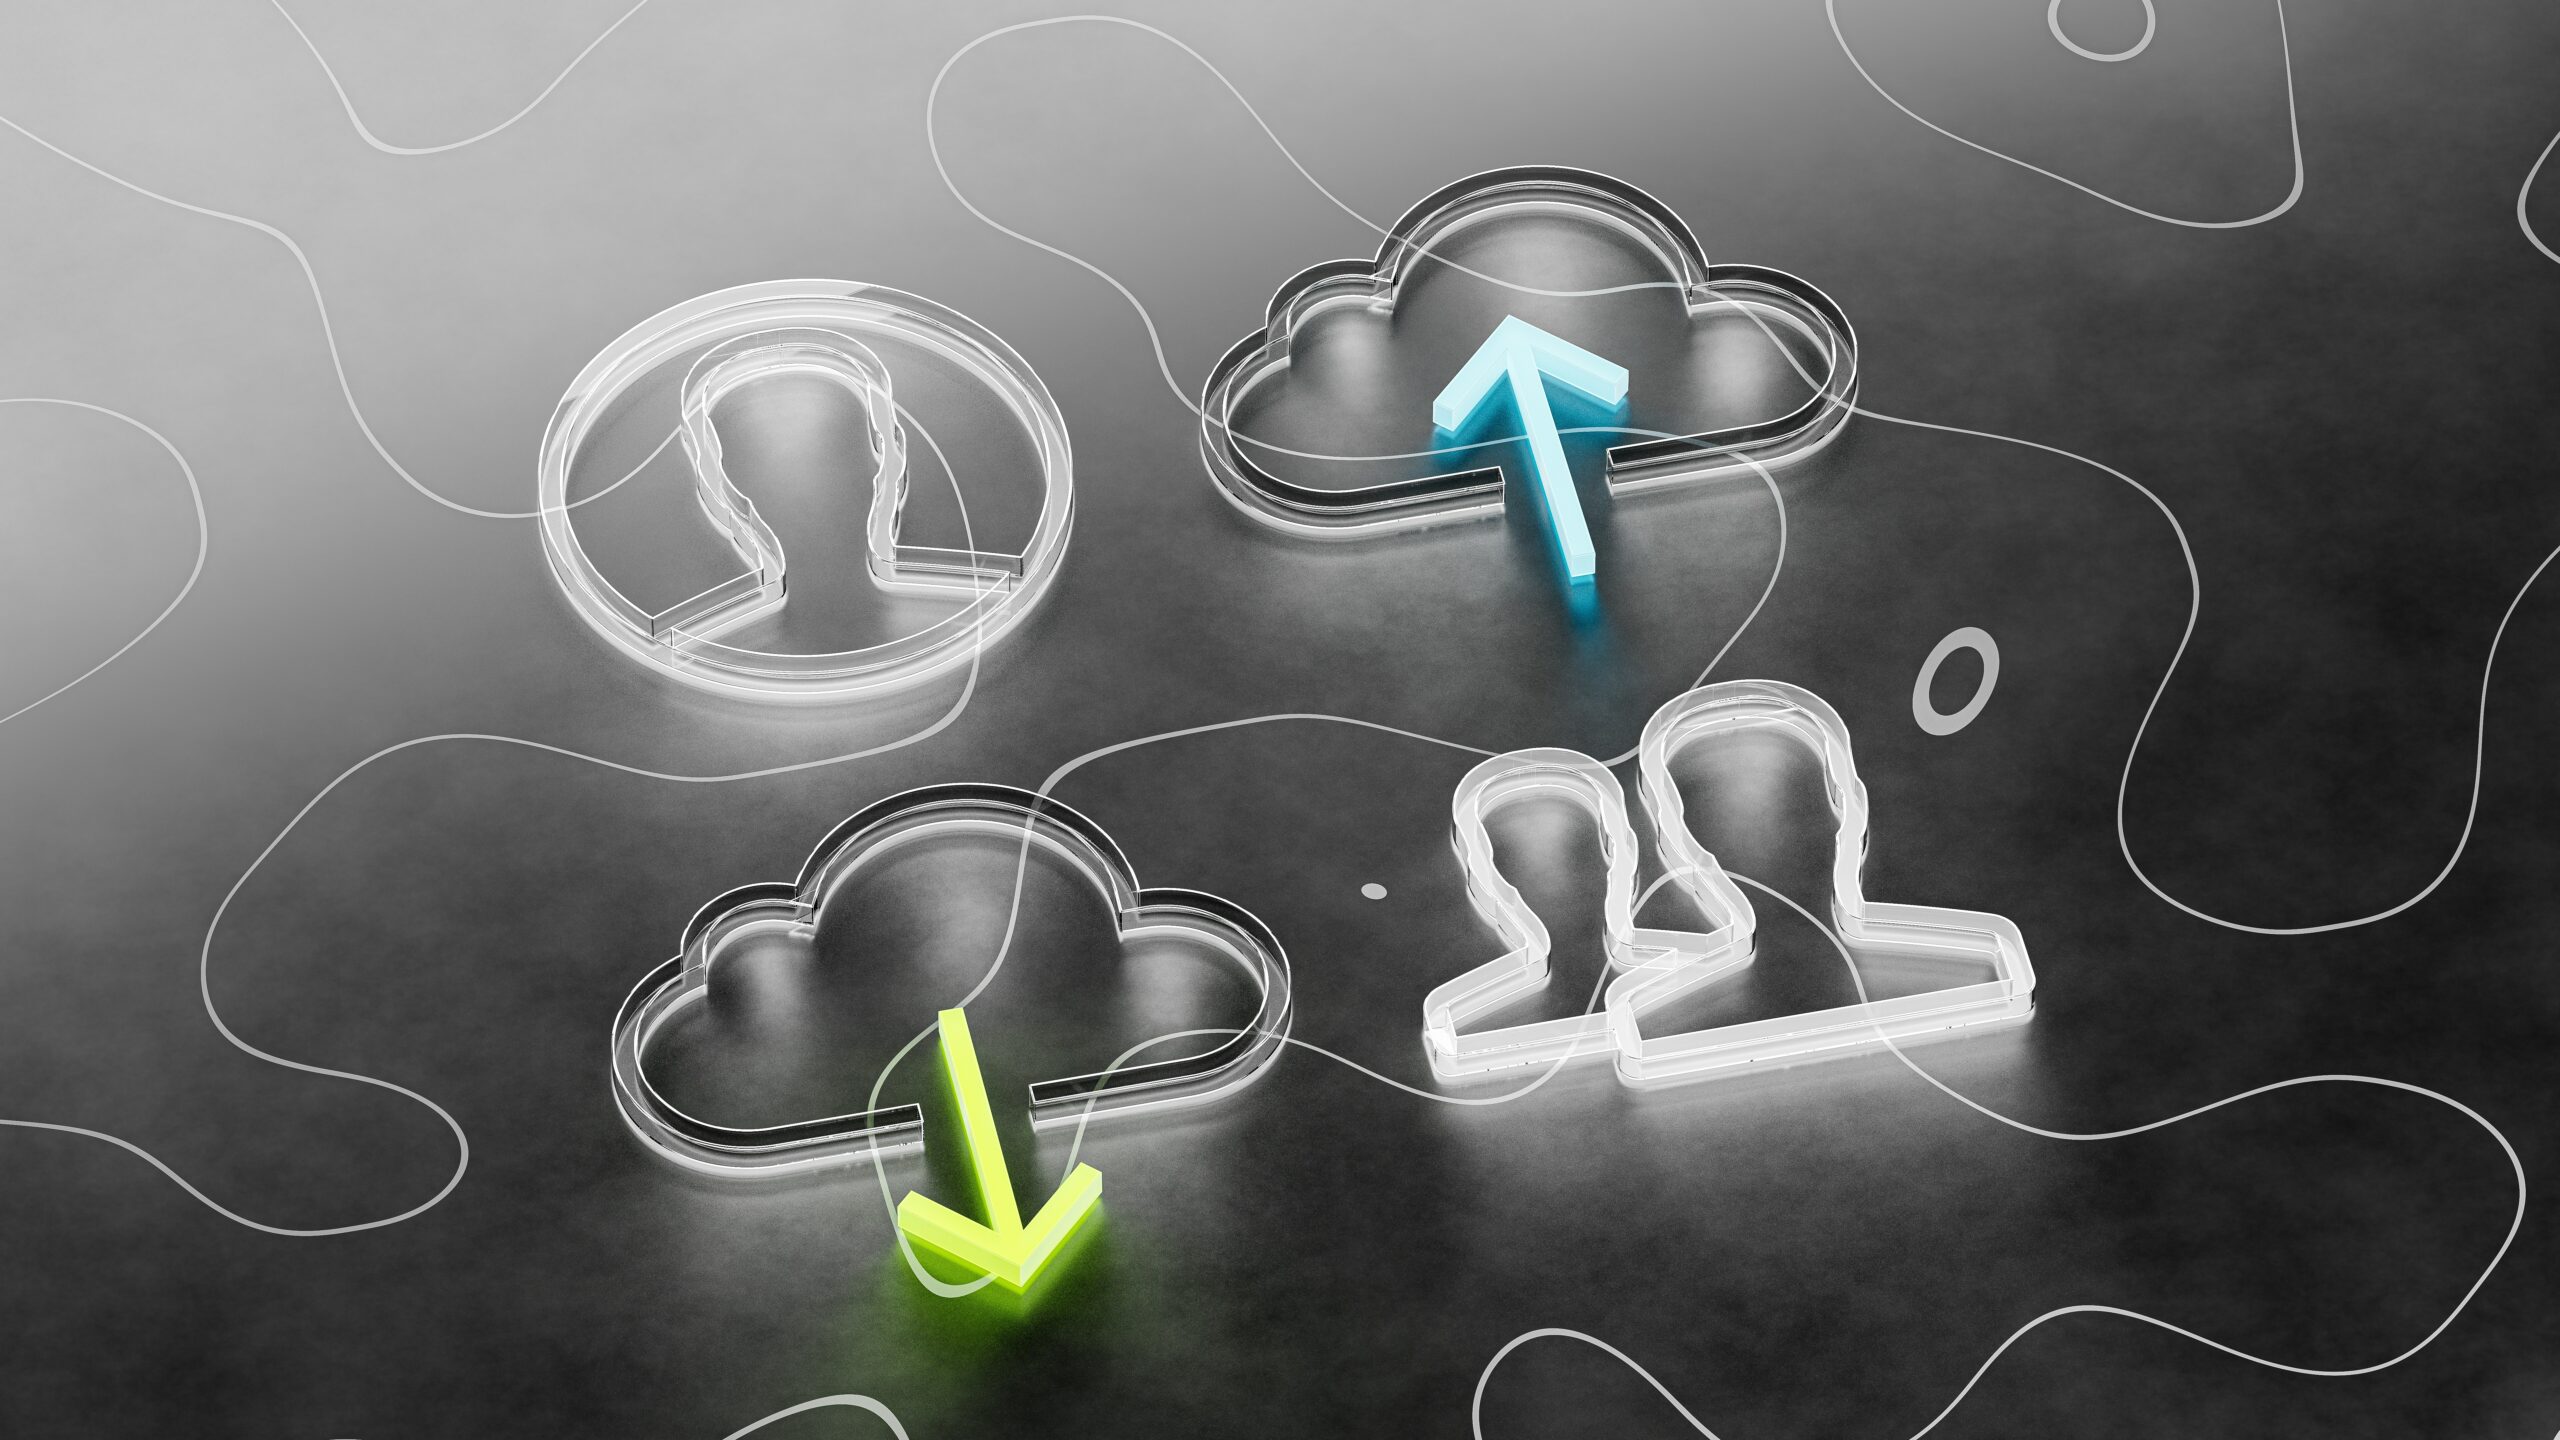 Abstract graphic of glowing cloud symbols with arrows indicating data transfer, an aspect of IT infrastructure management.